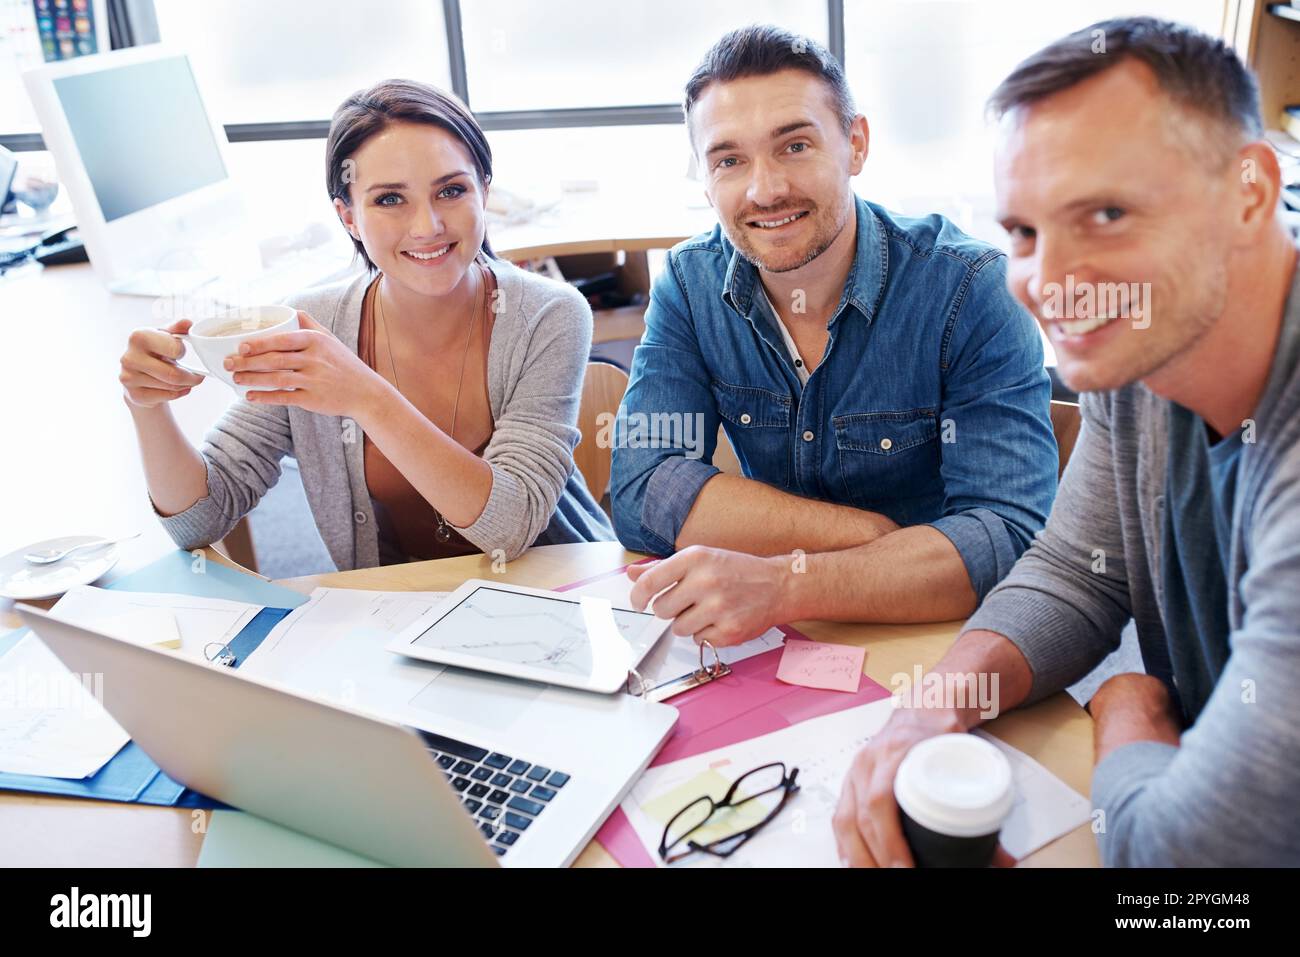 We keep meetings informal here. three coworkers having a discussion at a table. Stock Photo